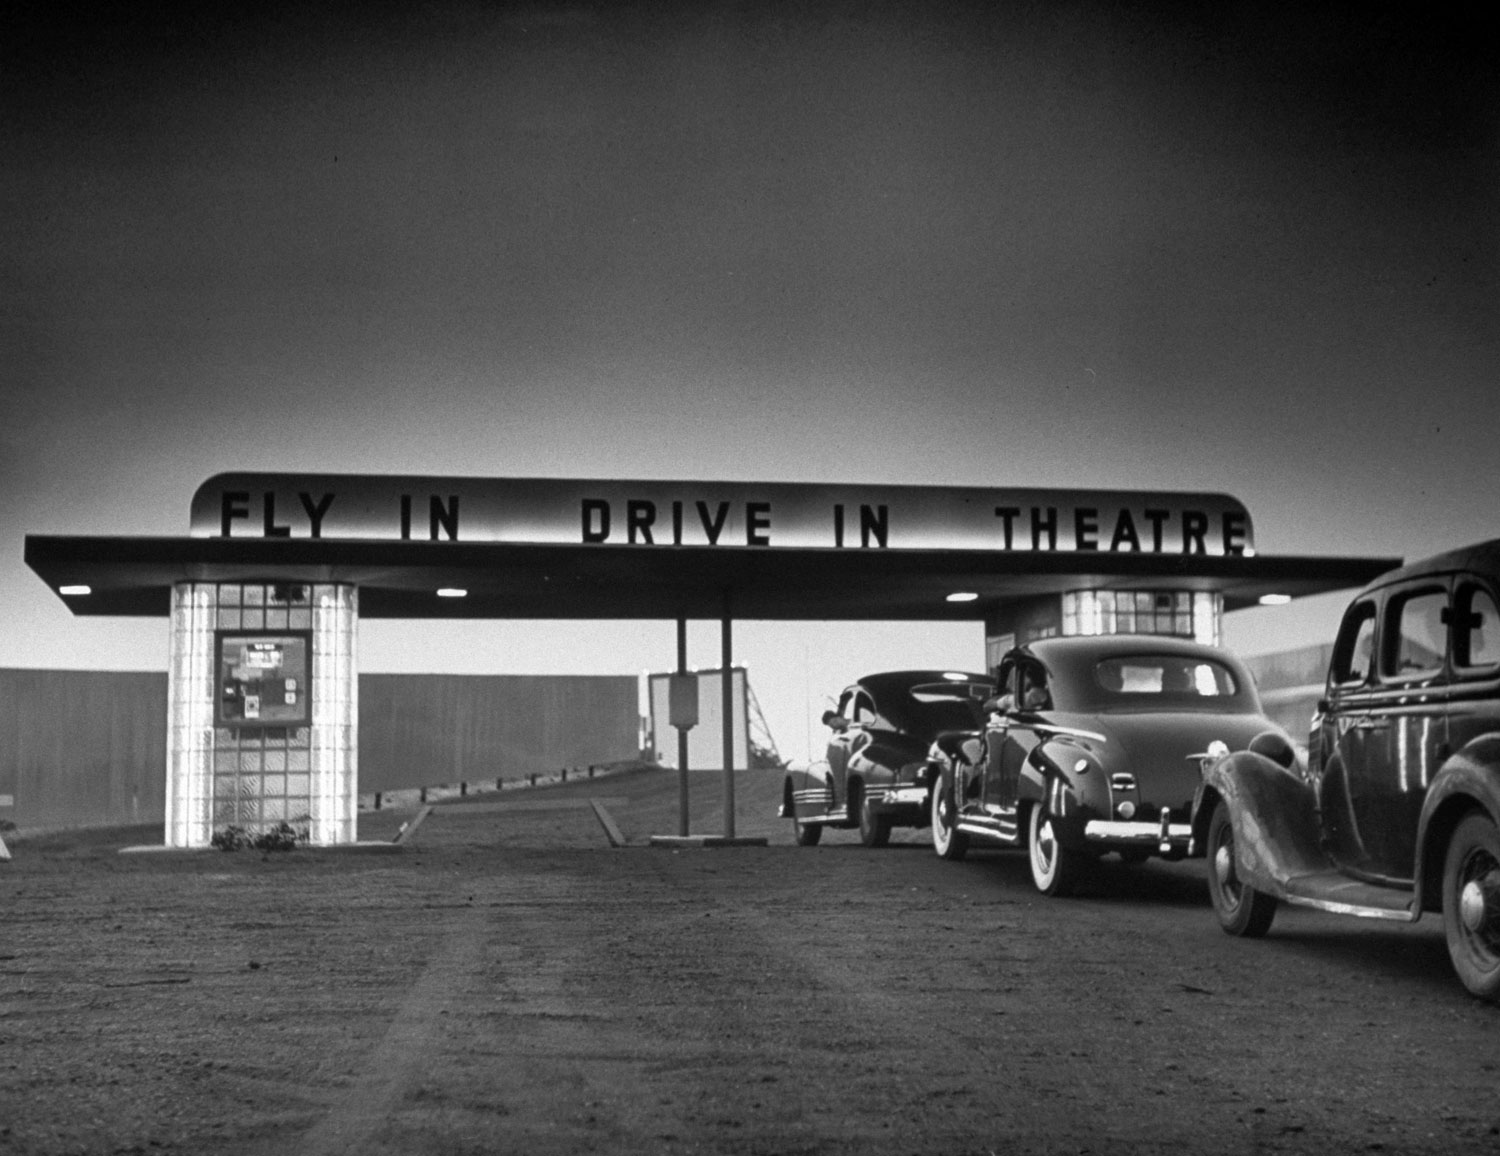 A "fly-in" drive-in theater for airplanes and cars, 1949.